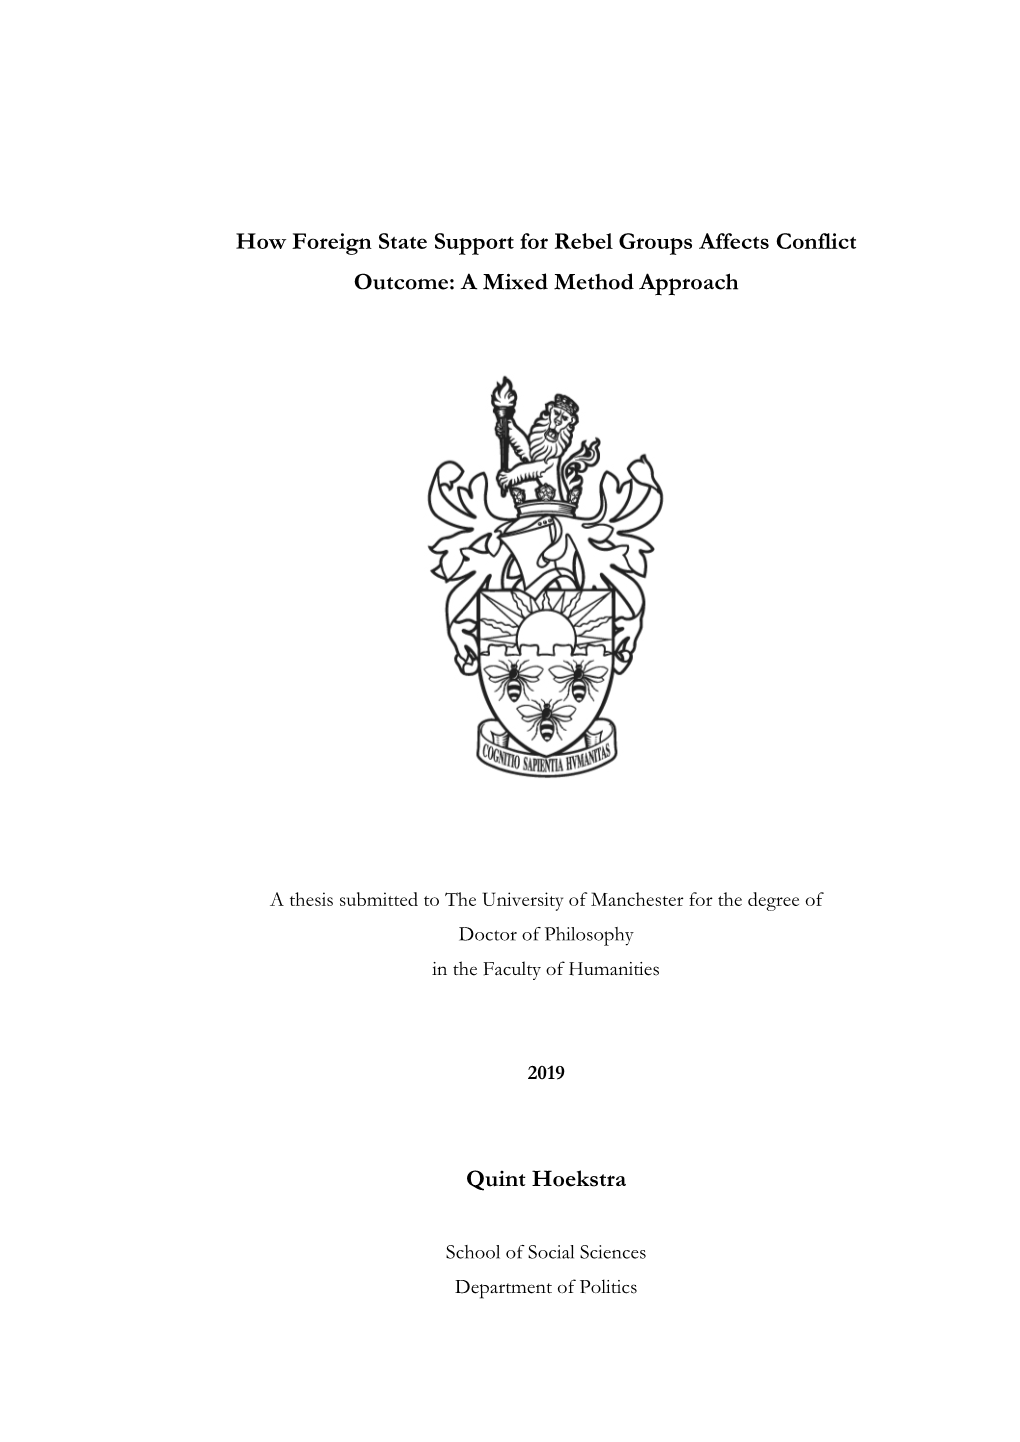 How Foreign State Support for Rebel Groups Affects Conflict Outcome: a Mixed Method Approach